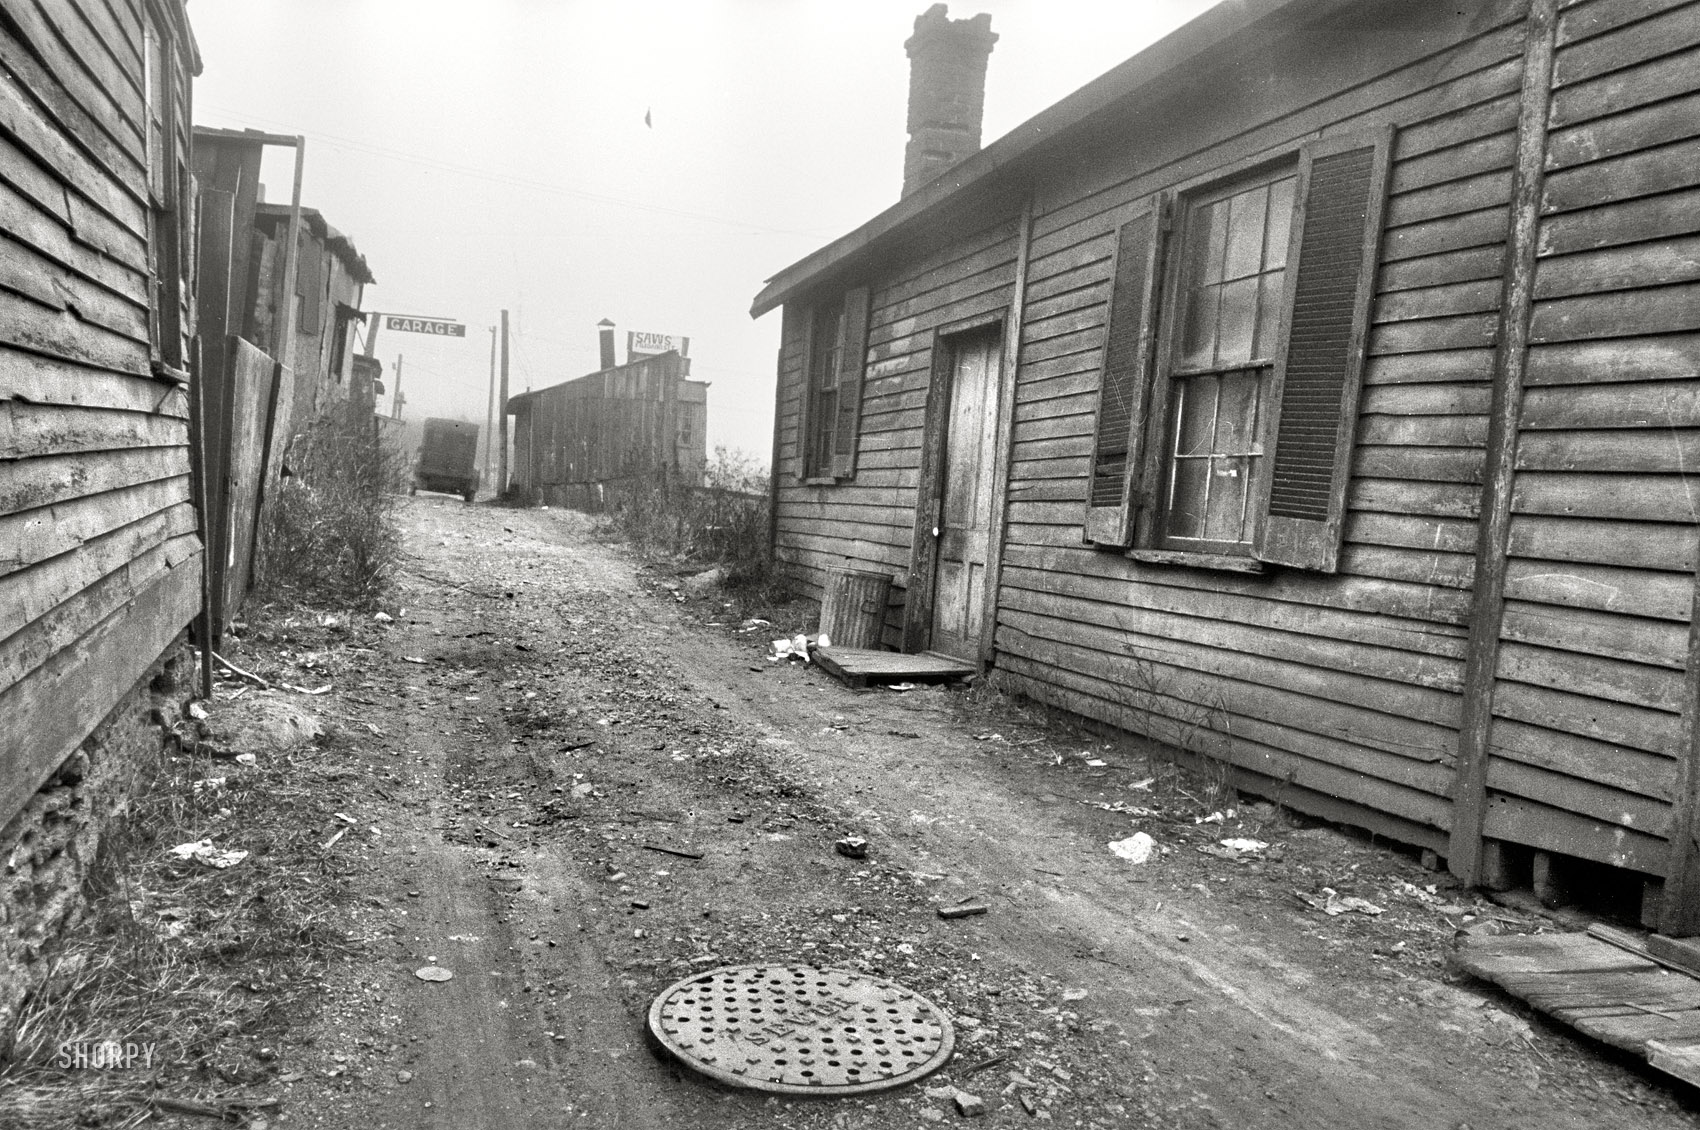 December 1935. "Hamilton County, Ohio. Cincinnati slum dwellings." An alleyway view of the "Garage" sign seen in the previous post. 35mm nitrate negative by Carl Mydans for the Resettlement Administration. View full size.